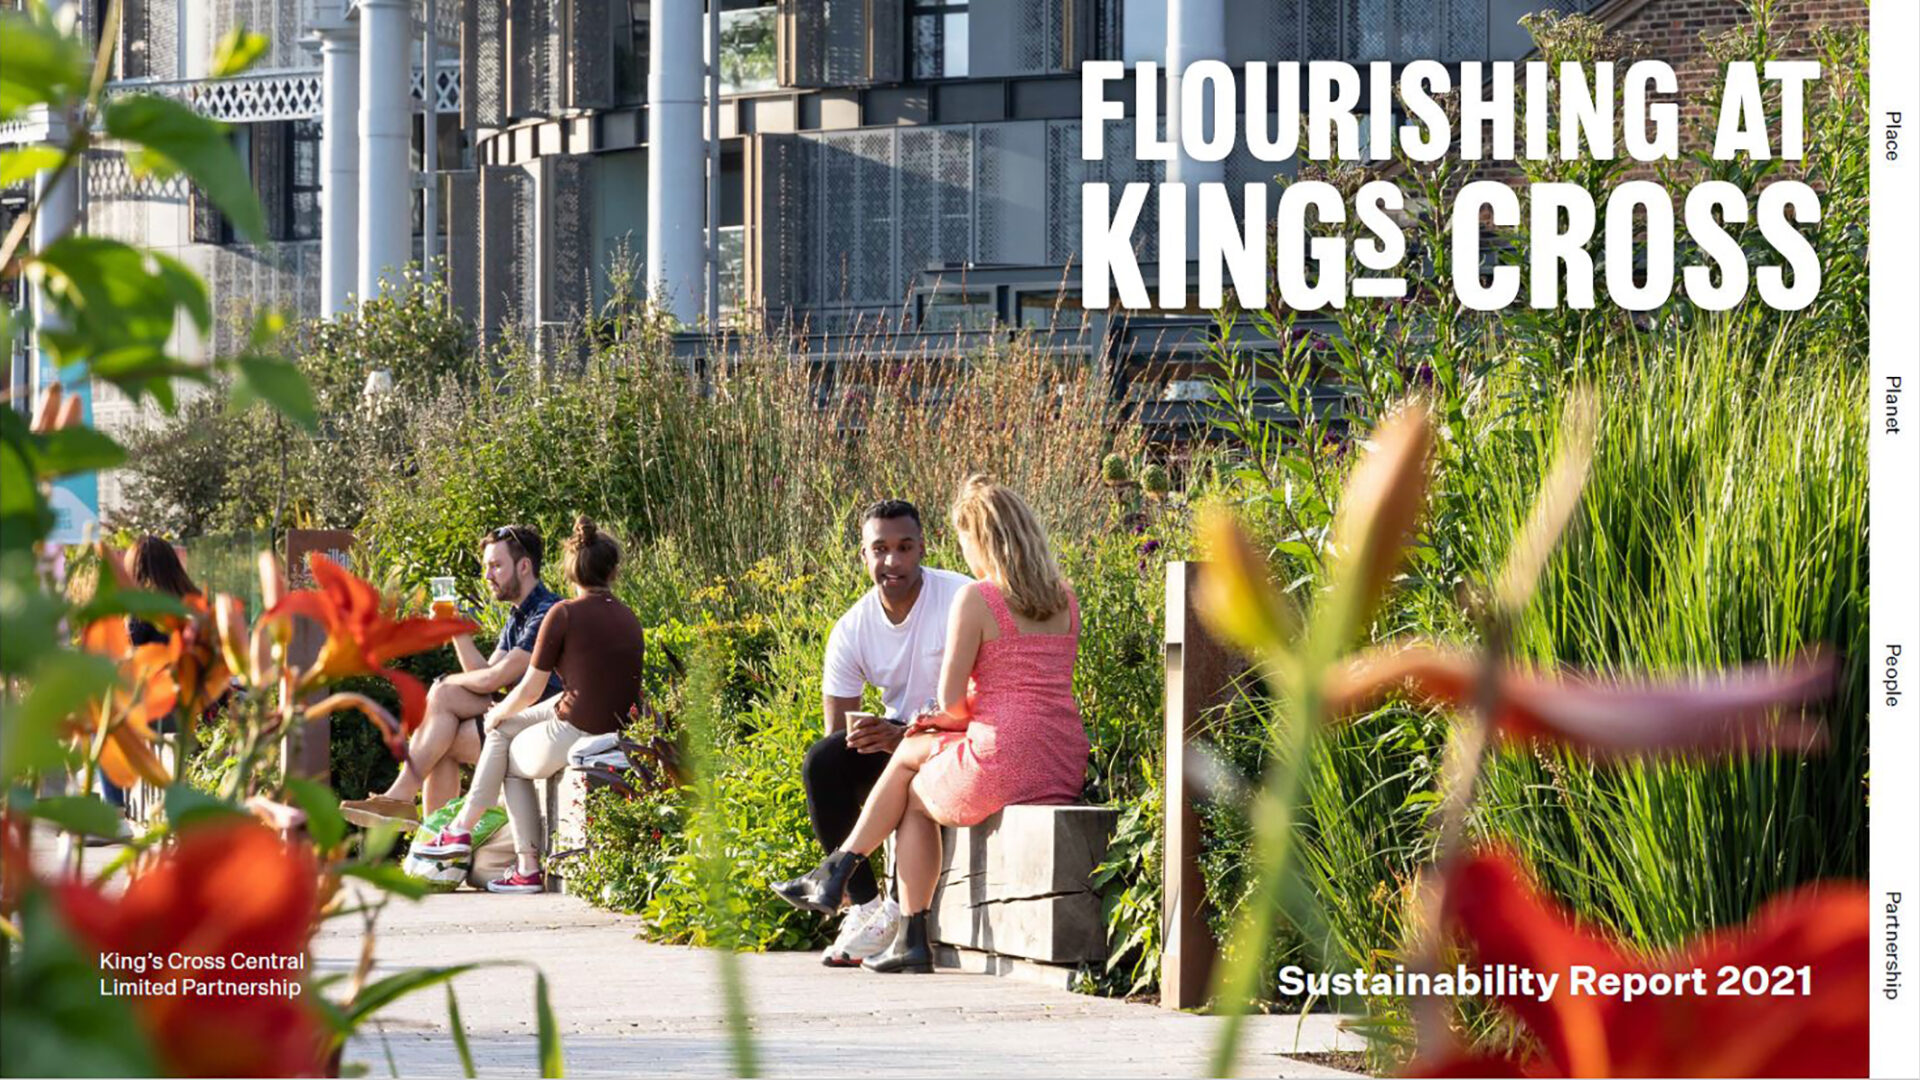 King's Cross Sustainability report 2021